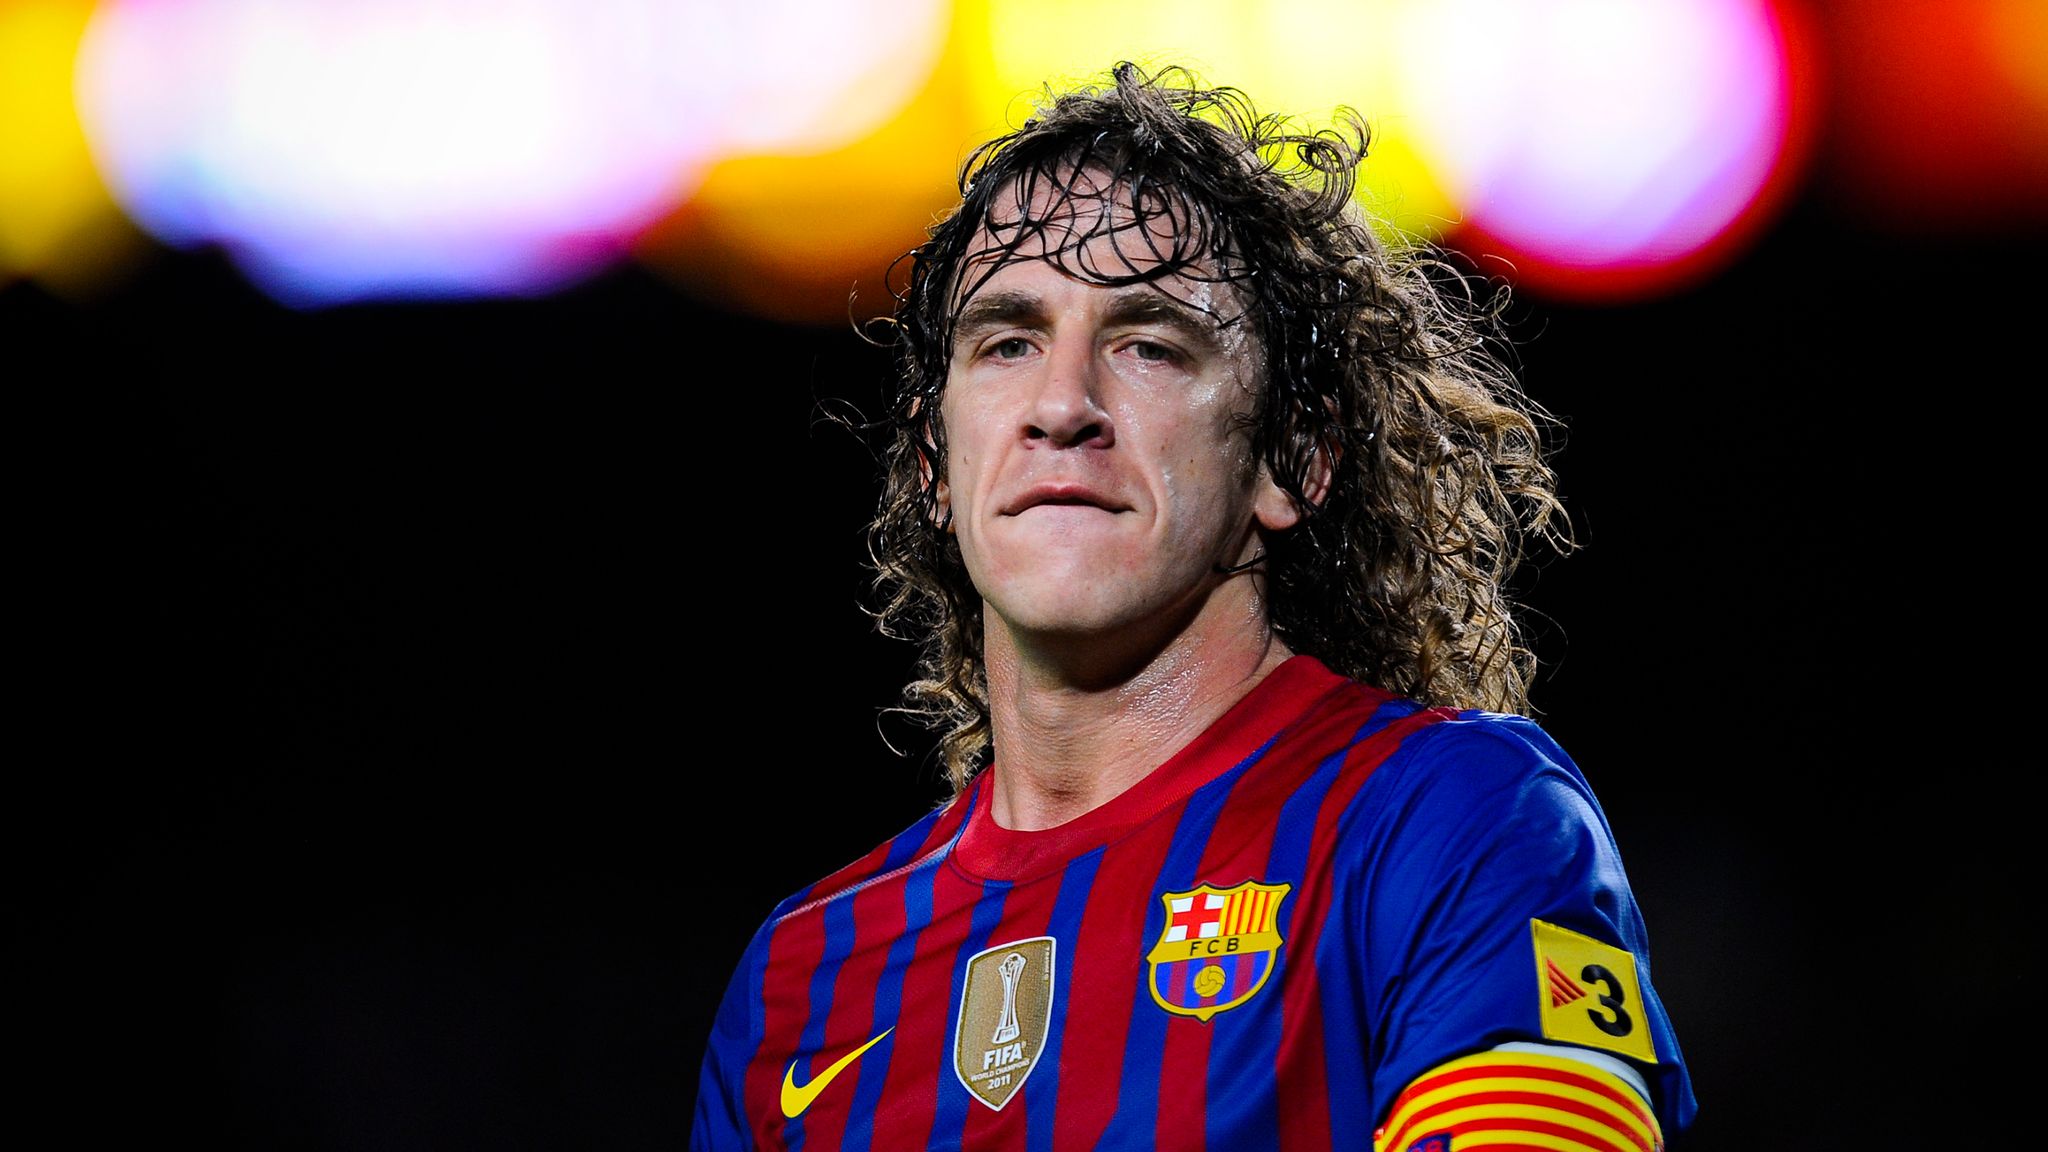  Carles Puyol, a Spanish professional footballer who played as a centre back for Barcelona and the Spain national team, is seen here captaining FC Barcelona.